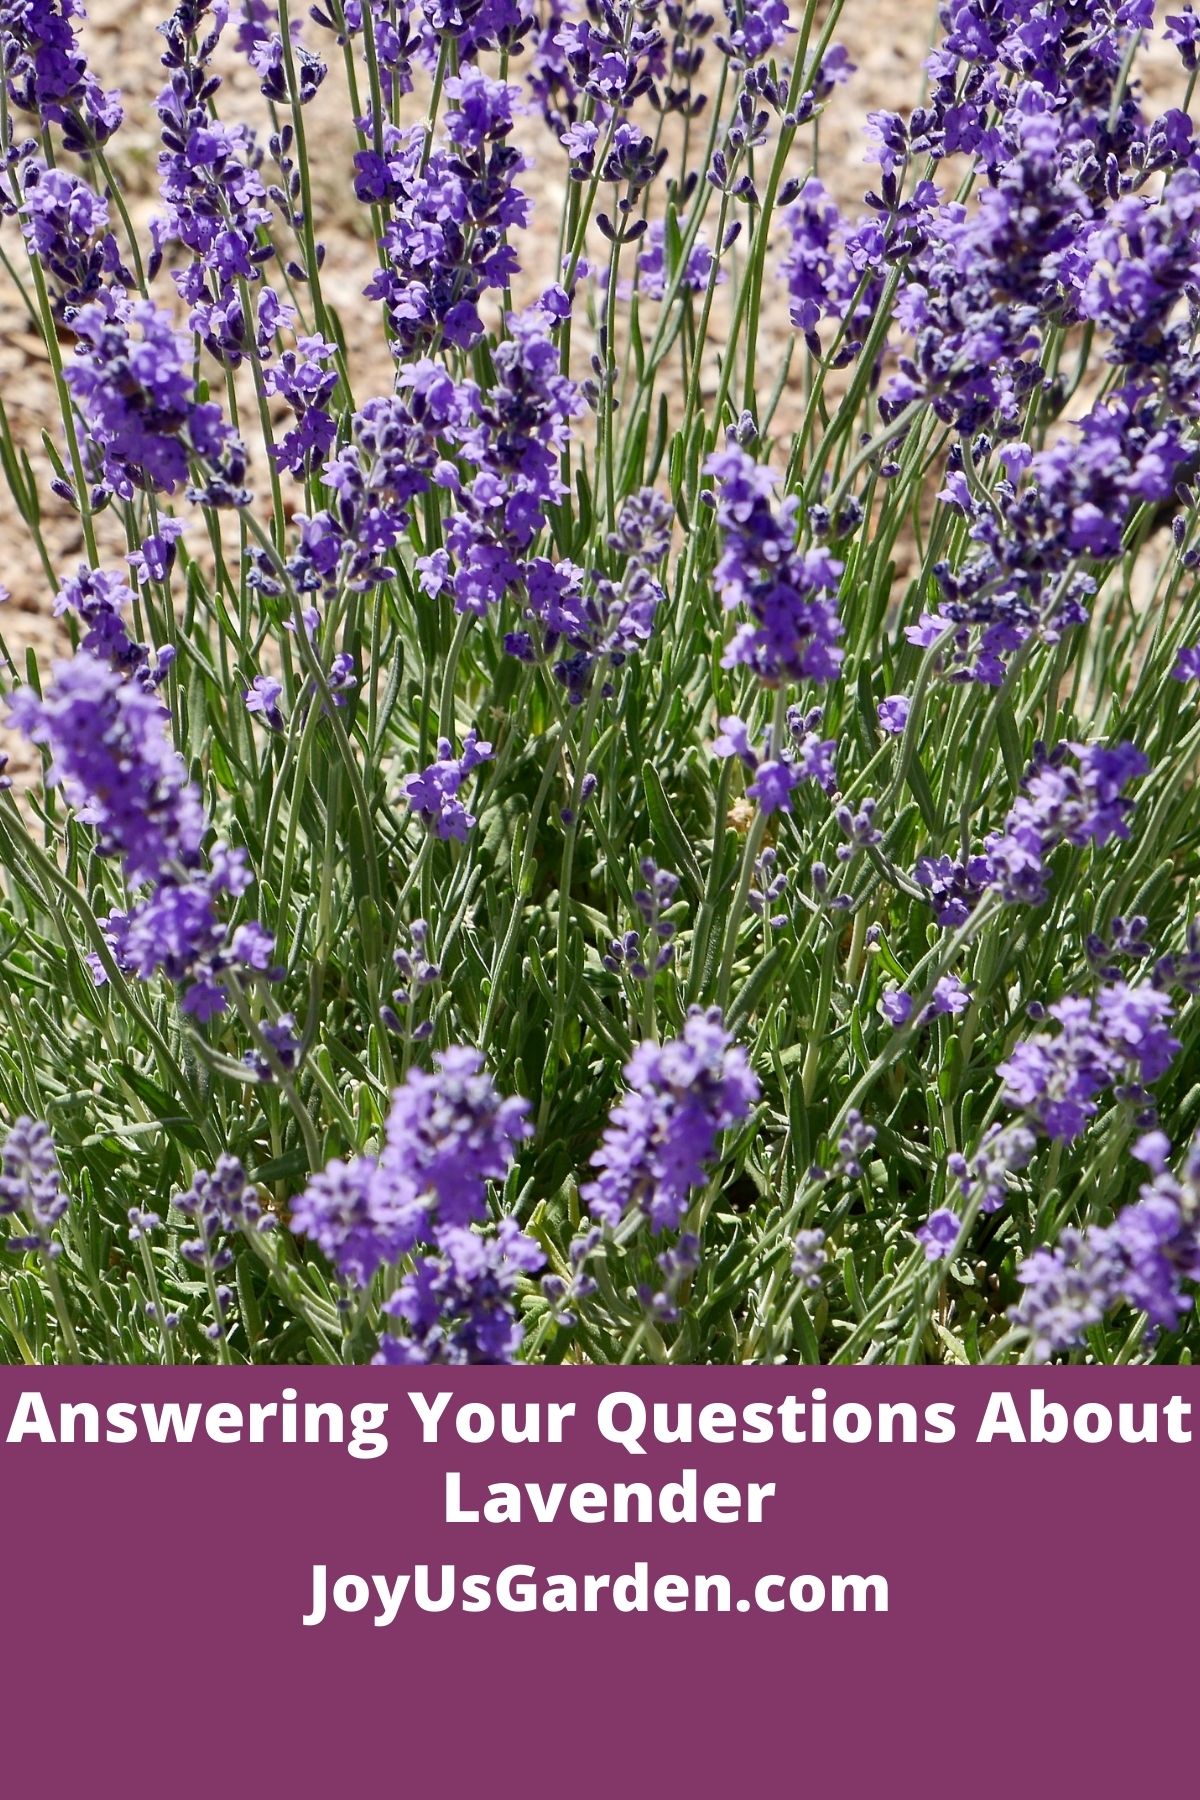 close up of many lavender flowers on a plant the text reads answering your questions about lavender joyusgarden.com